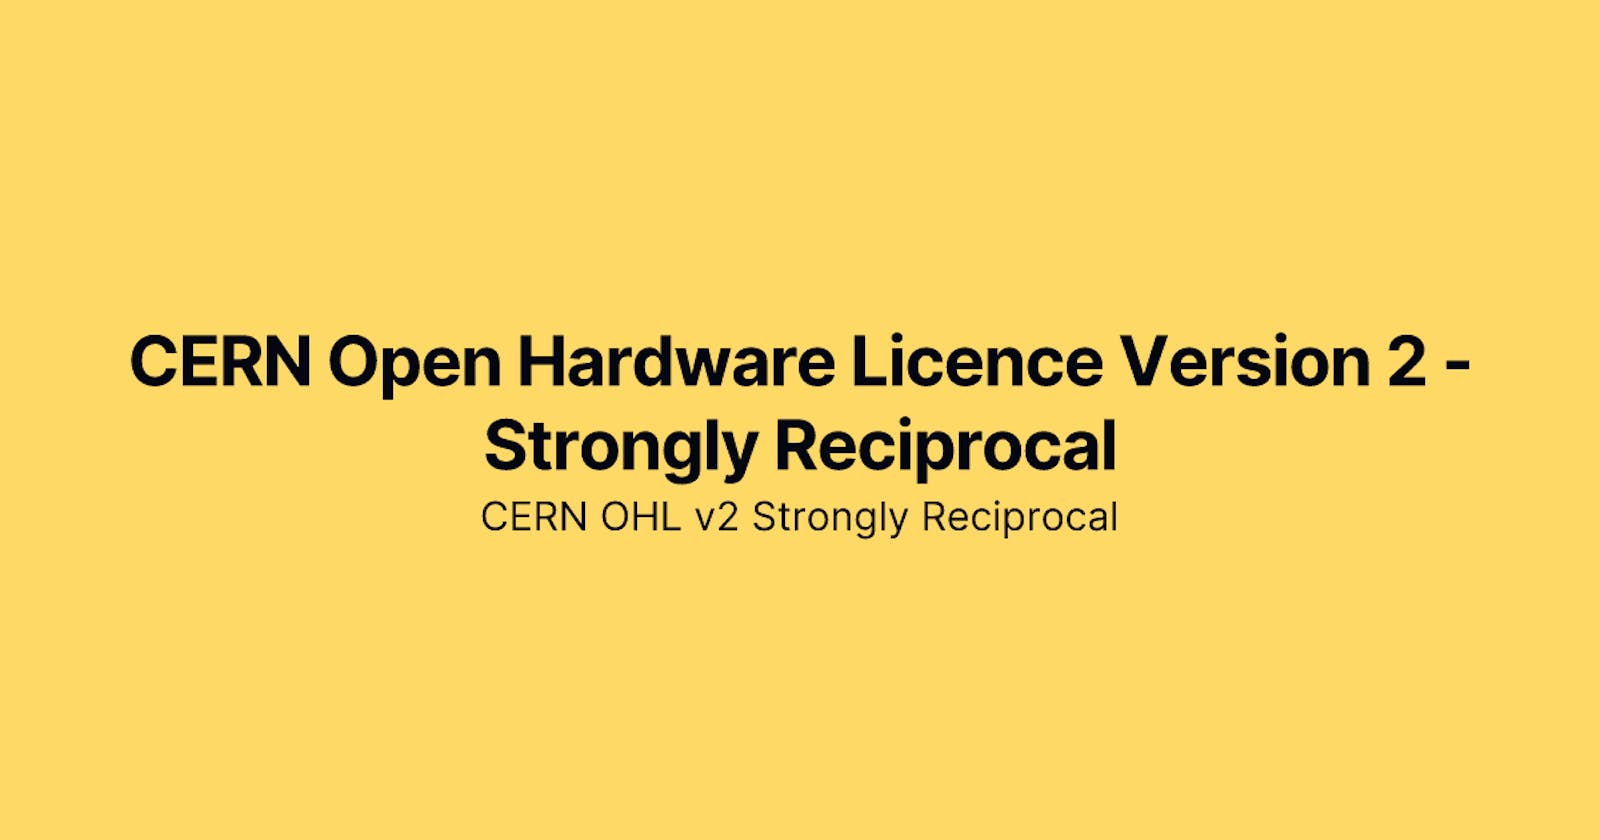 CERN Open Hardware Licence Version 2 - Strongly Reciprocal